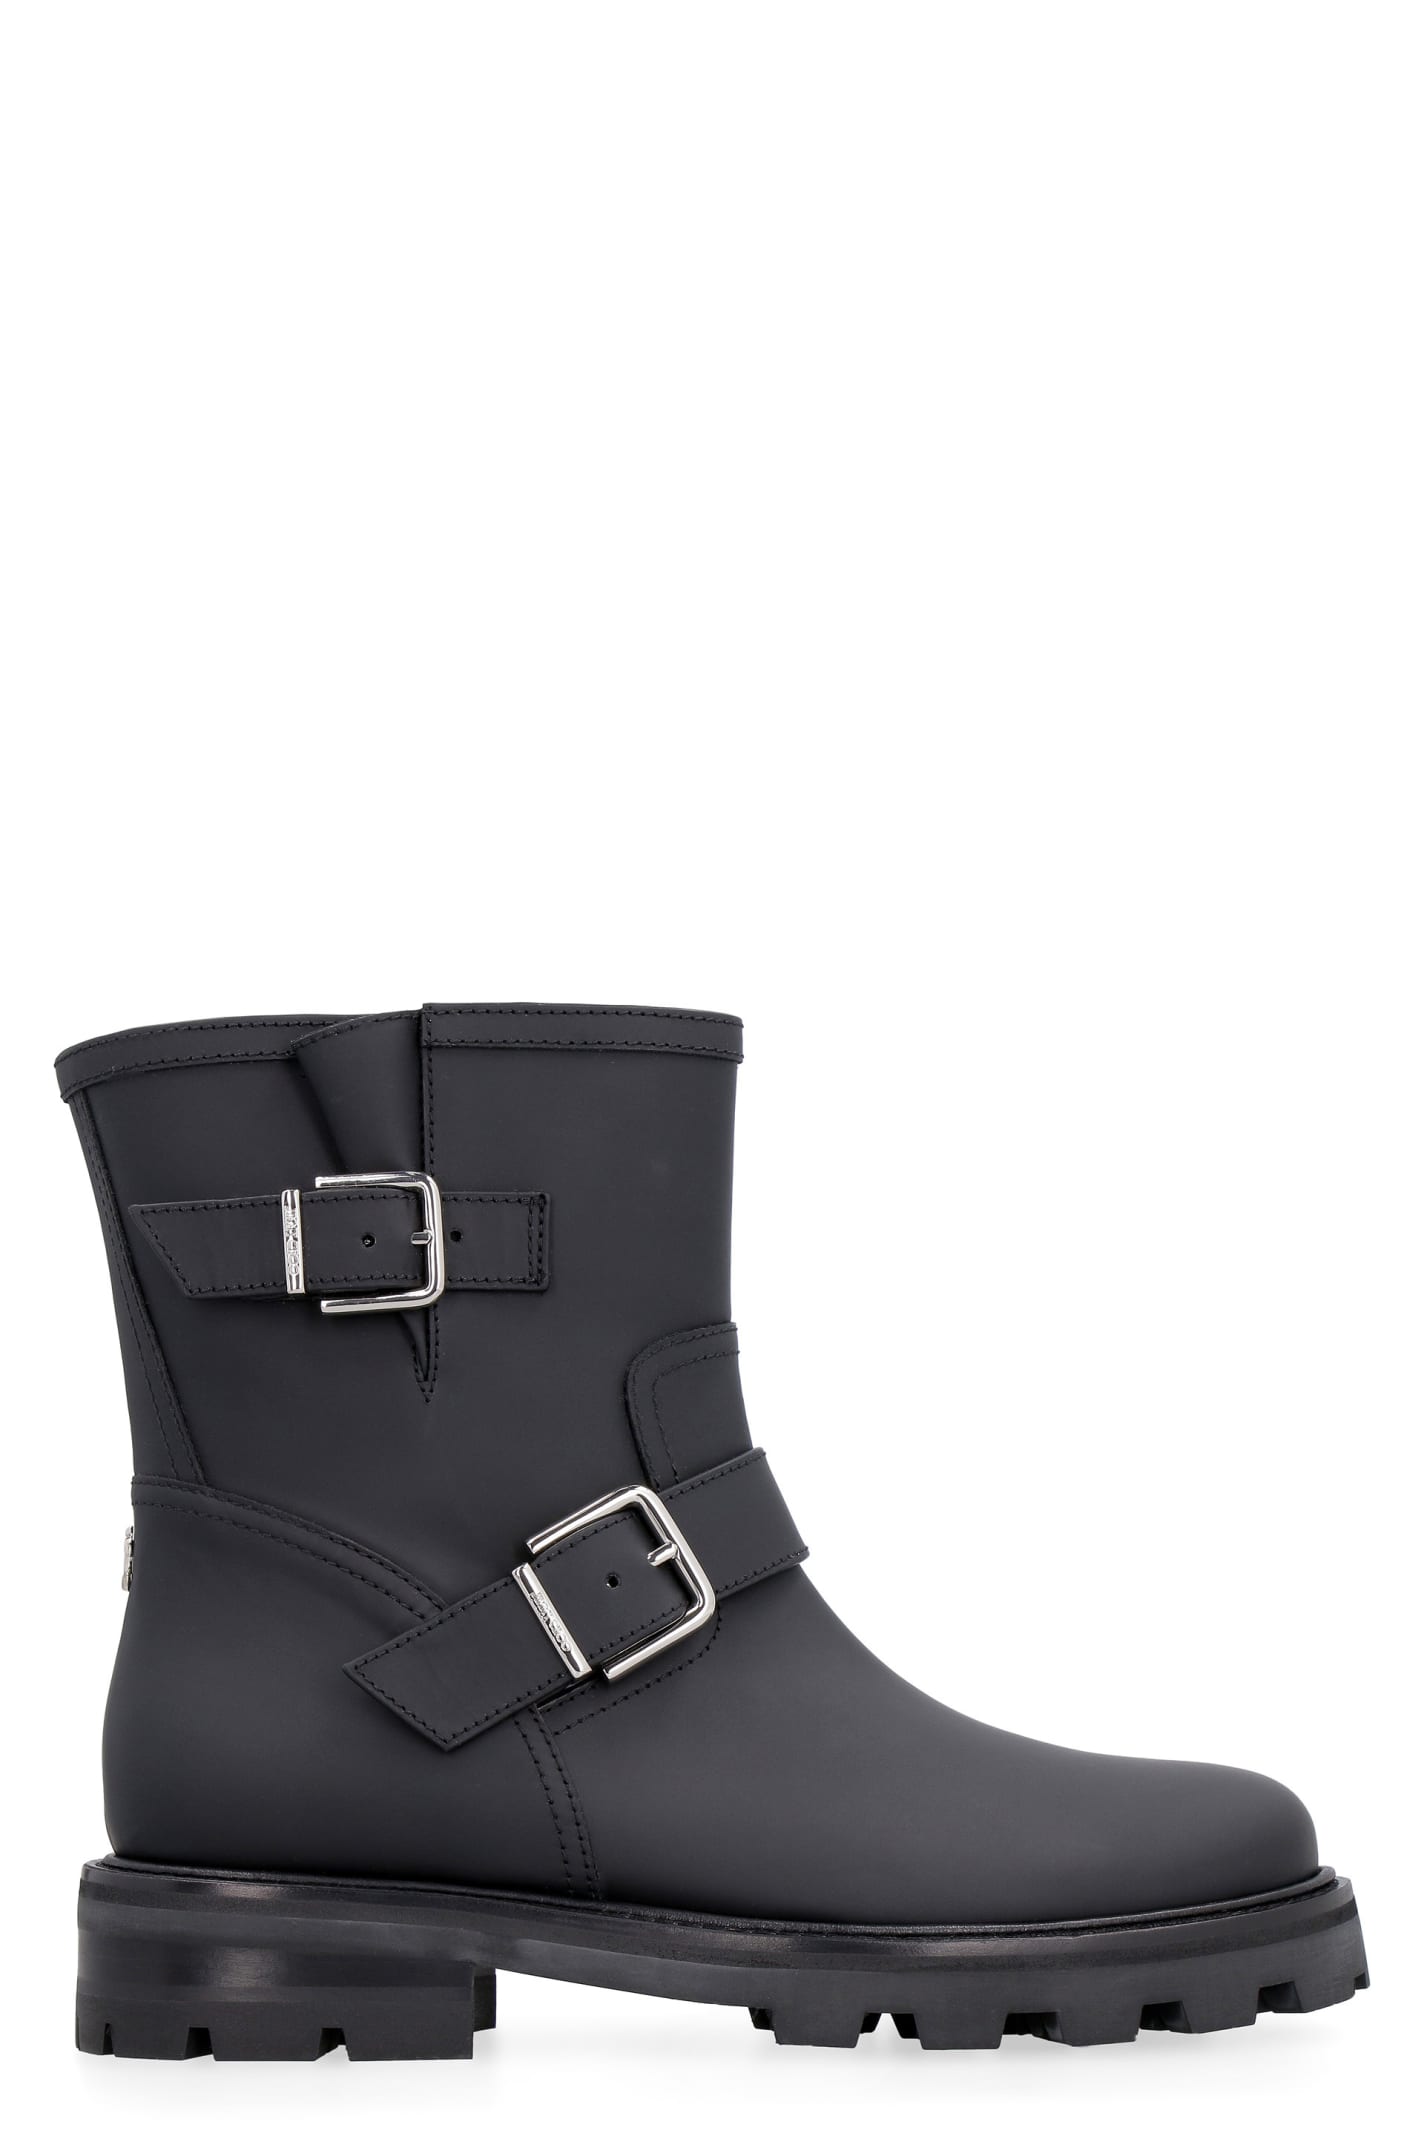 Jimmy Choo Youth Ii Leather Ankle Boots